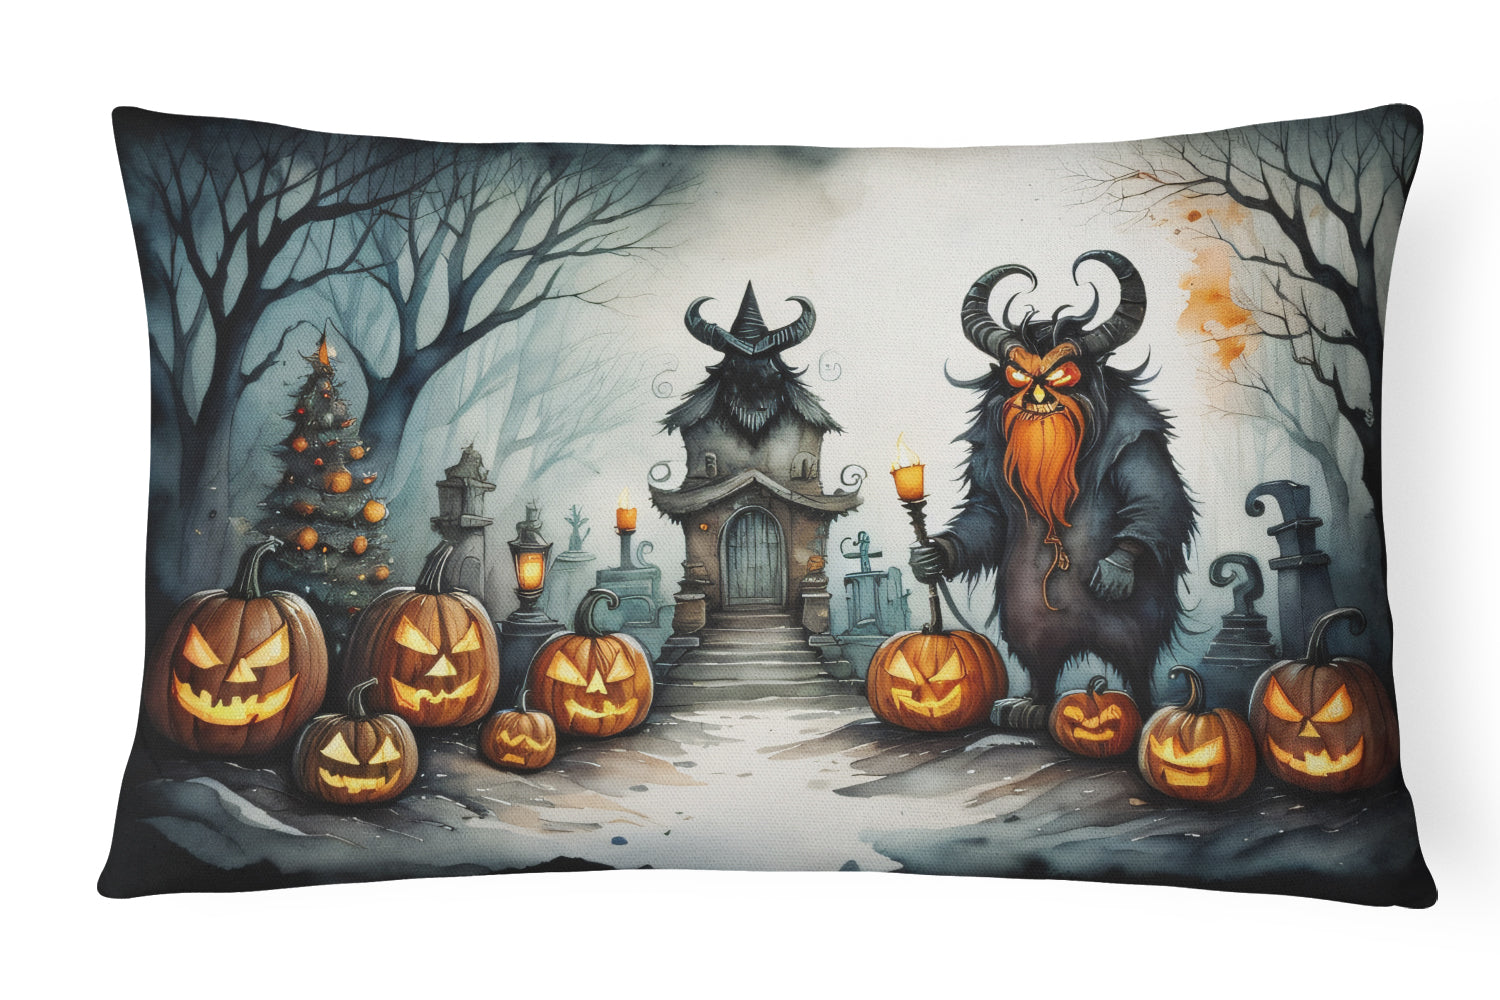 Buy this Krampus The Christmas Demon Spooky Halloween Fabric Decorative Pillow